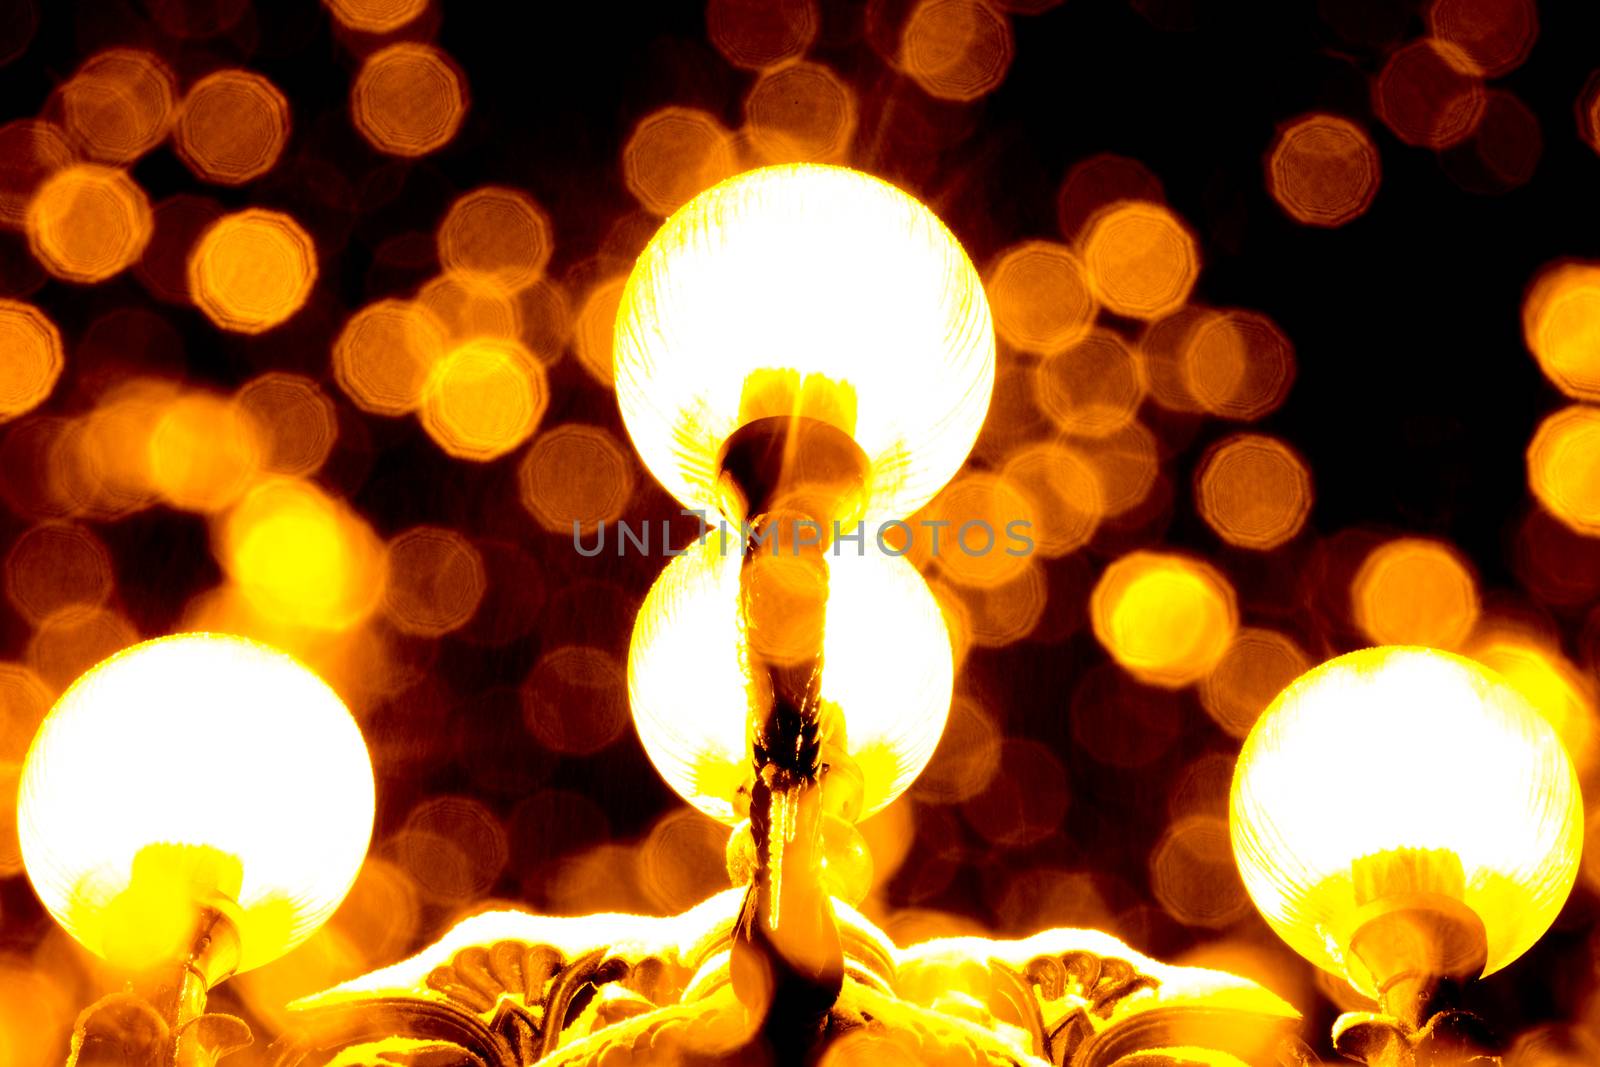 Close-up shot of antique yellow lantern at night with blurred snow flakes falling down.